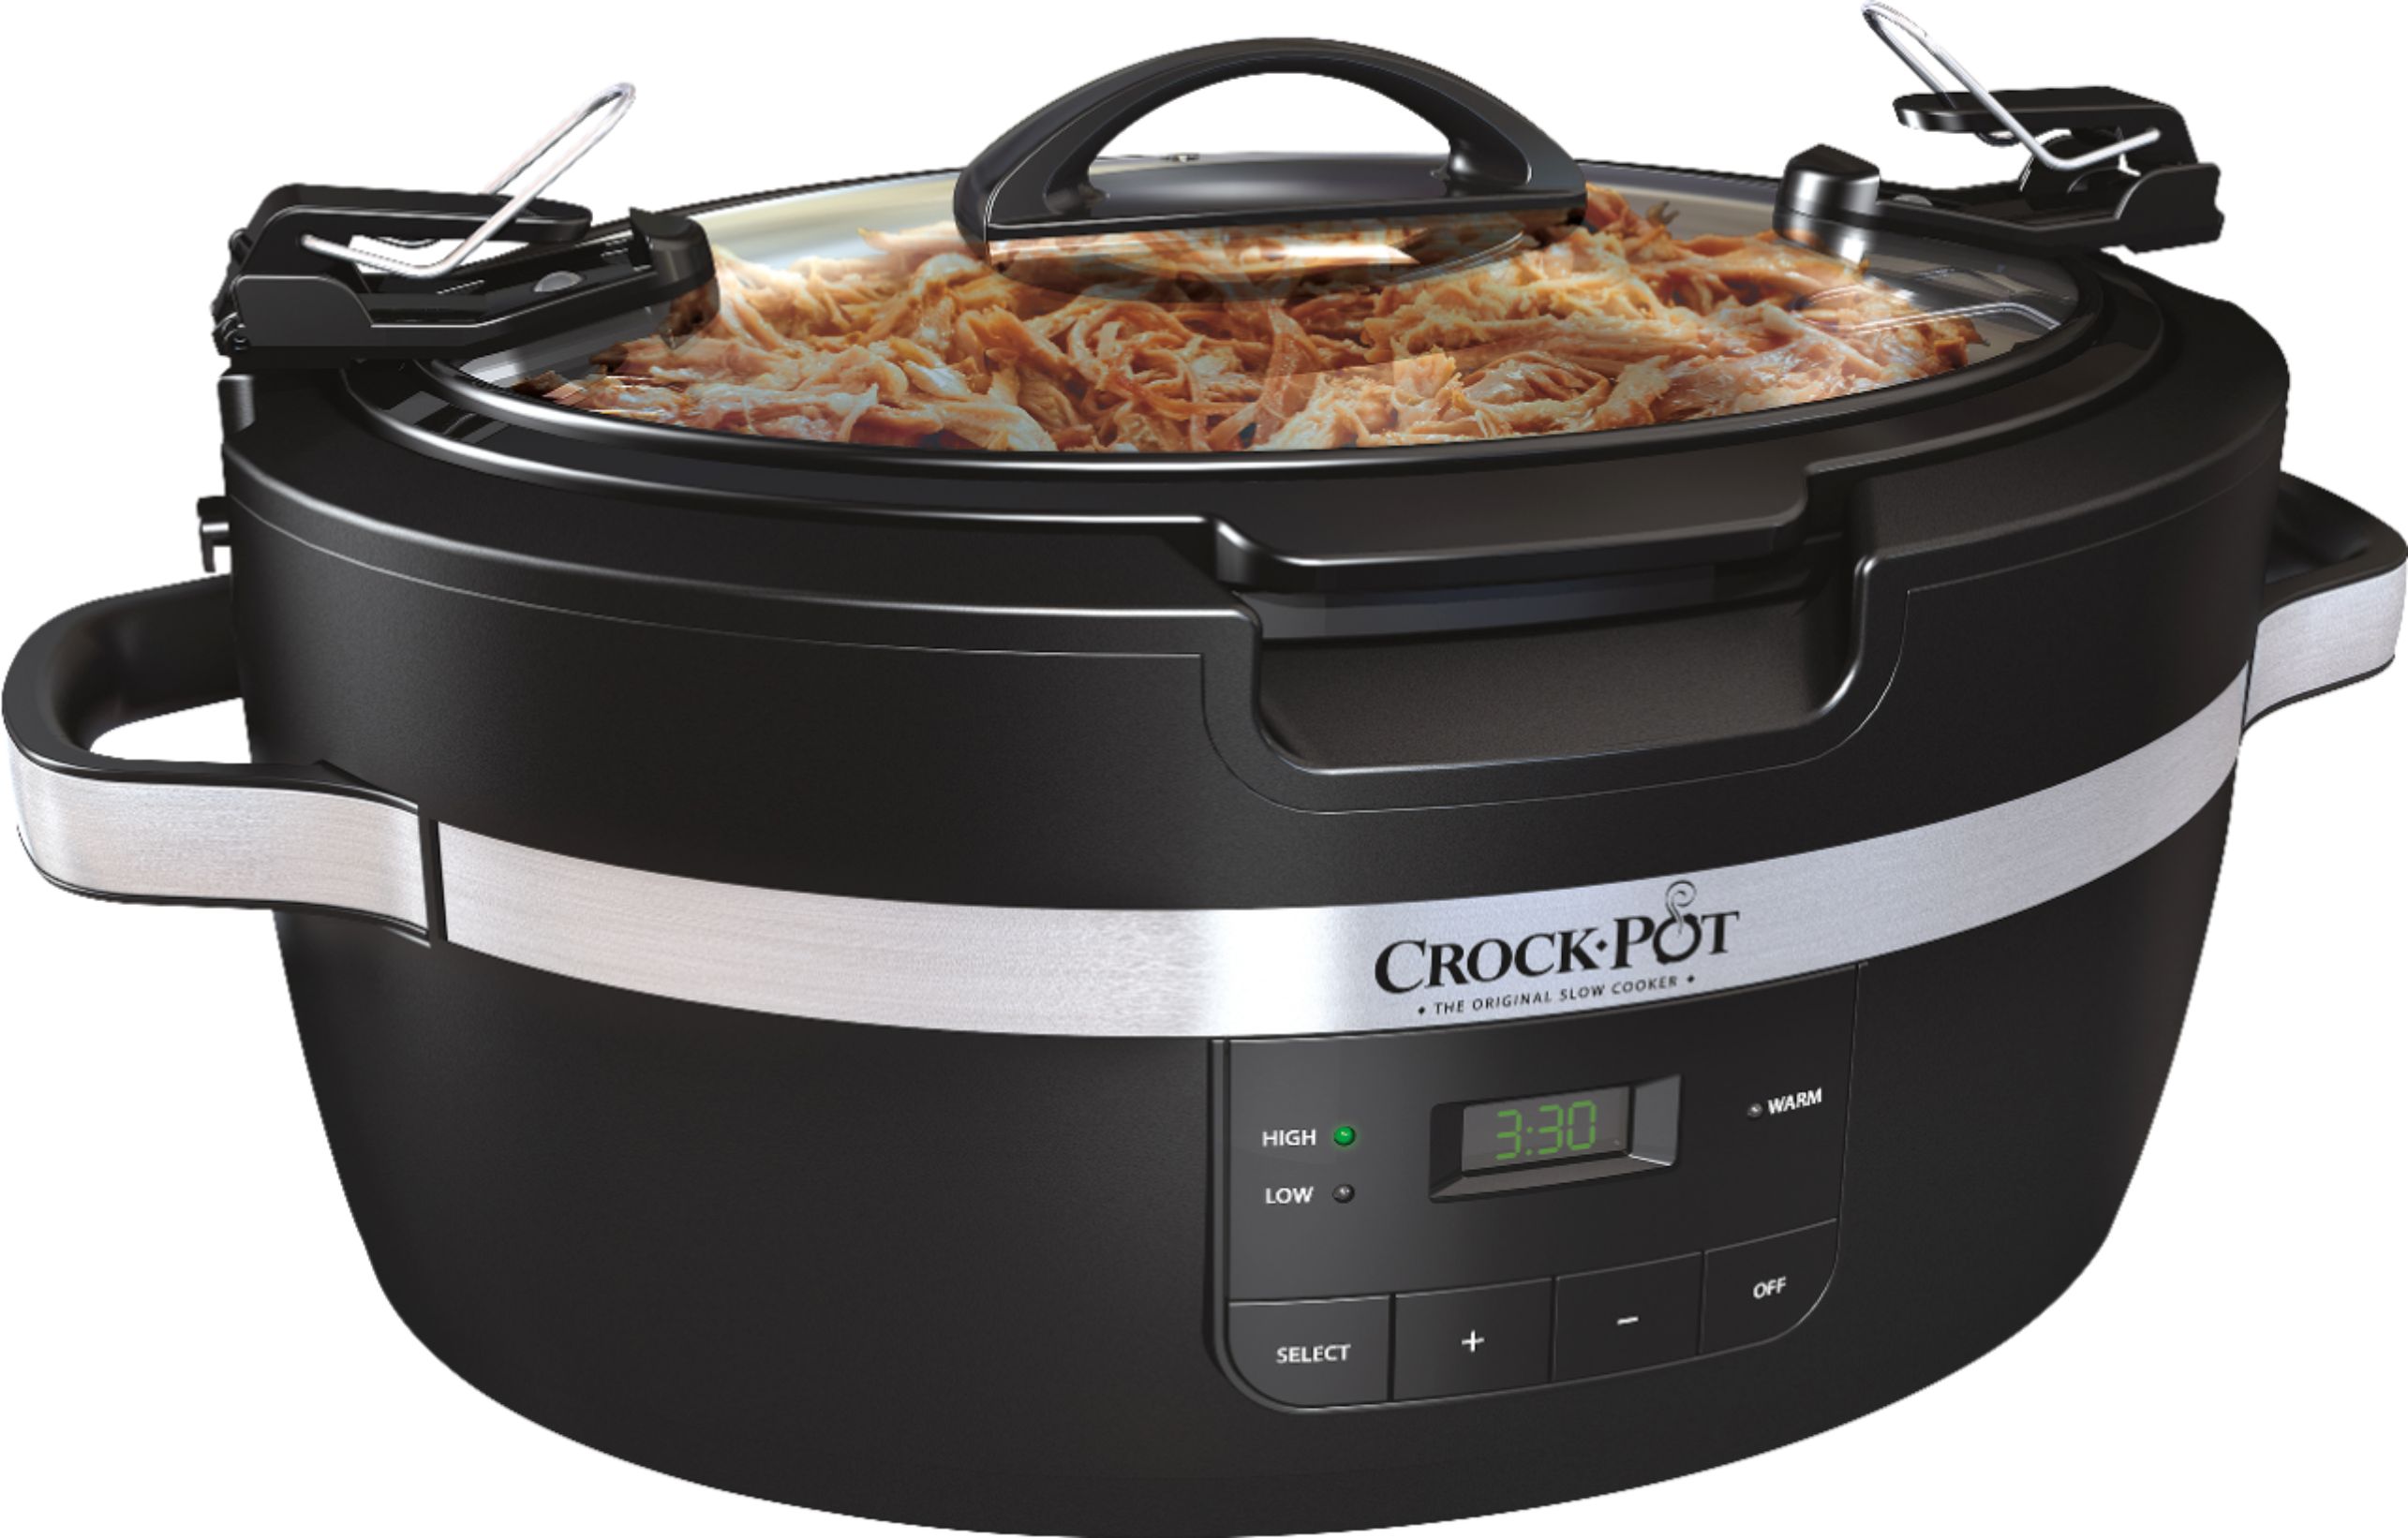 Crock-Pot ThermoShield Cook and Carry 6-Quart Slow Cooker Black SCCPCT600-B  - Best Buy